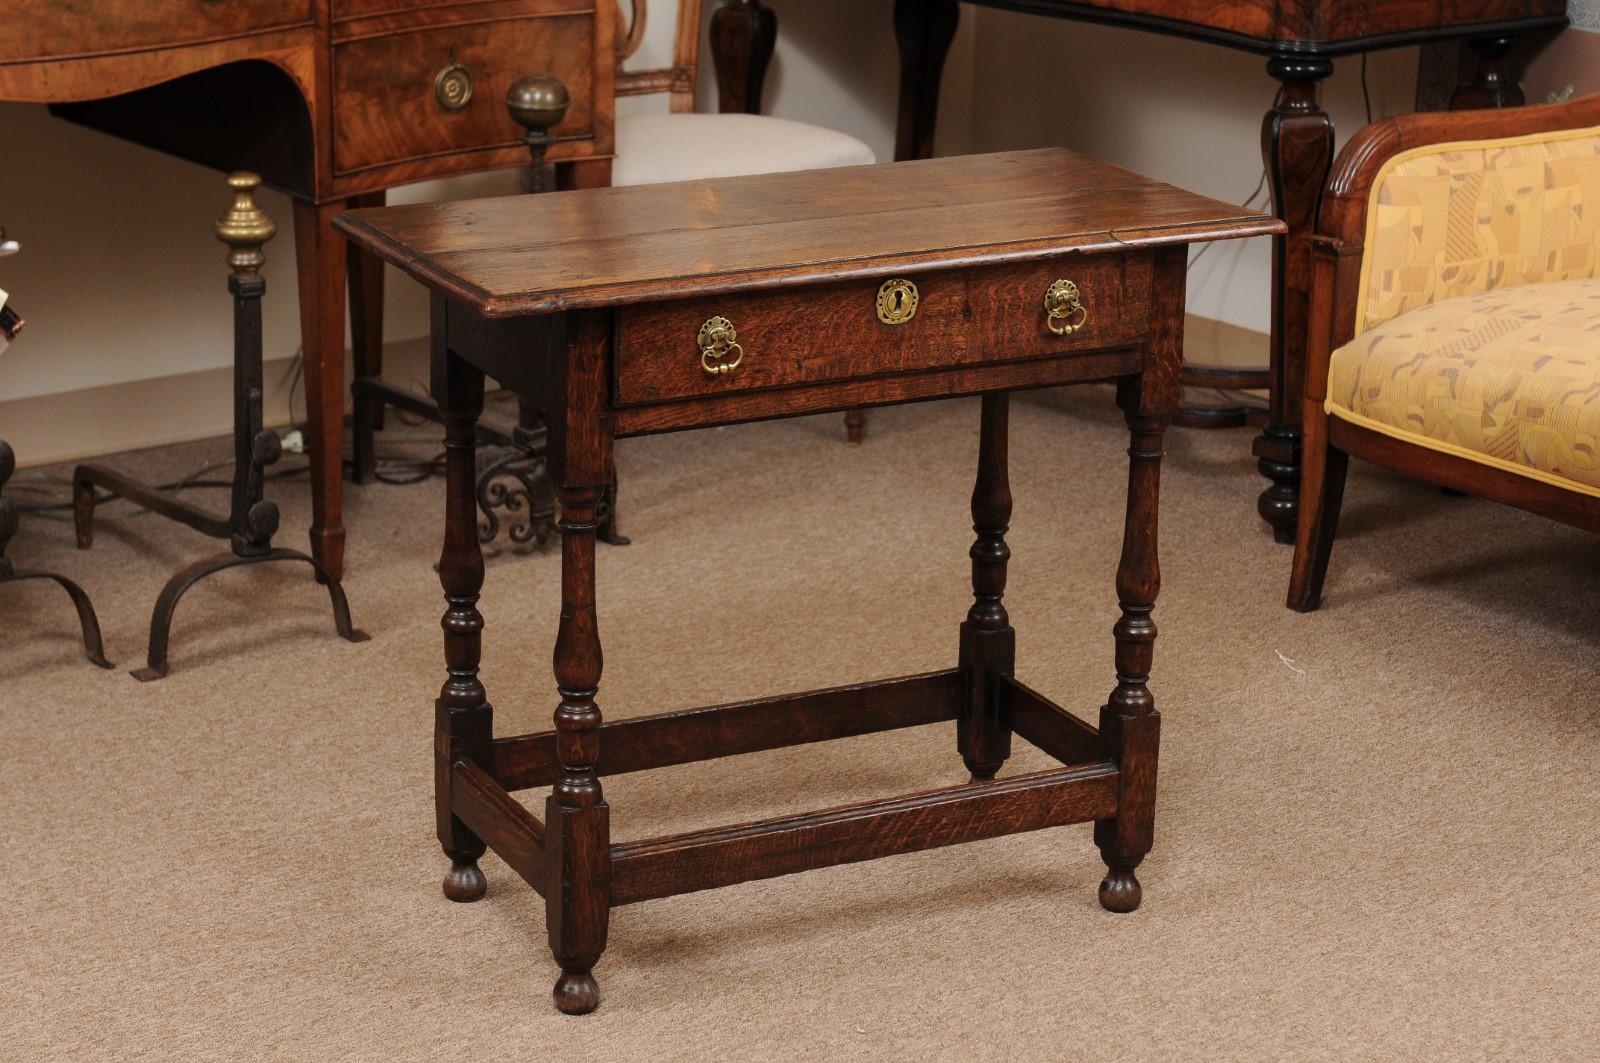 A 18th century English oak side table featuring drawer in frieze with brass hardware, turned legs joined by box stretcher and rounded feet.
 